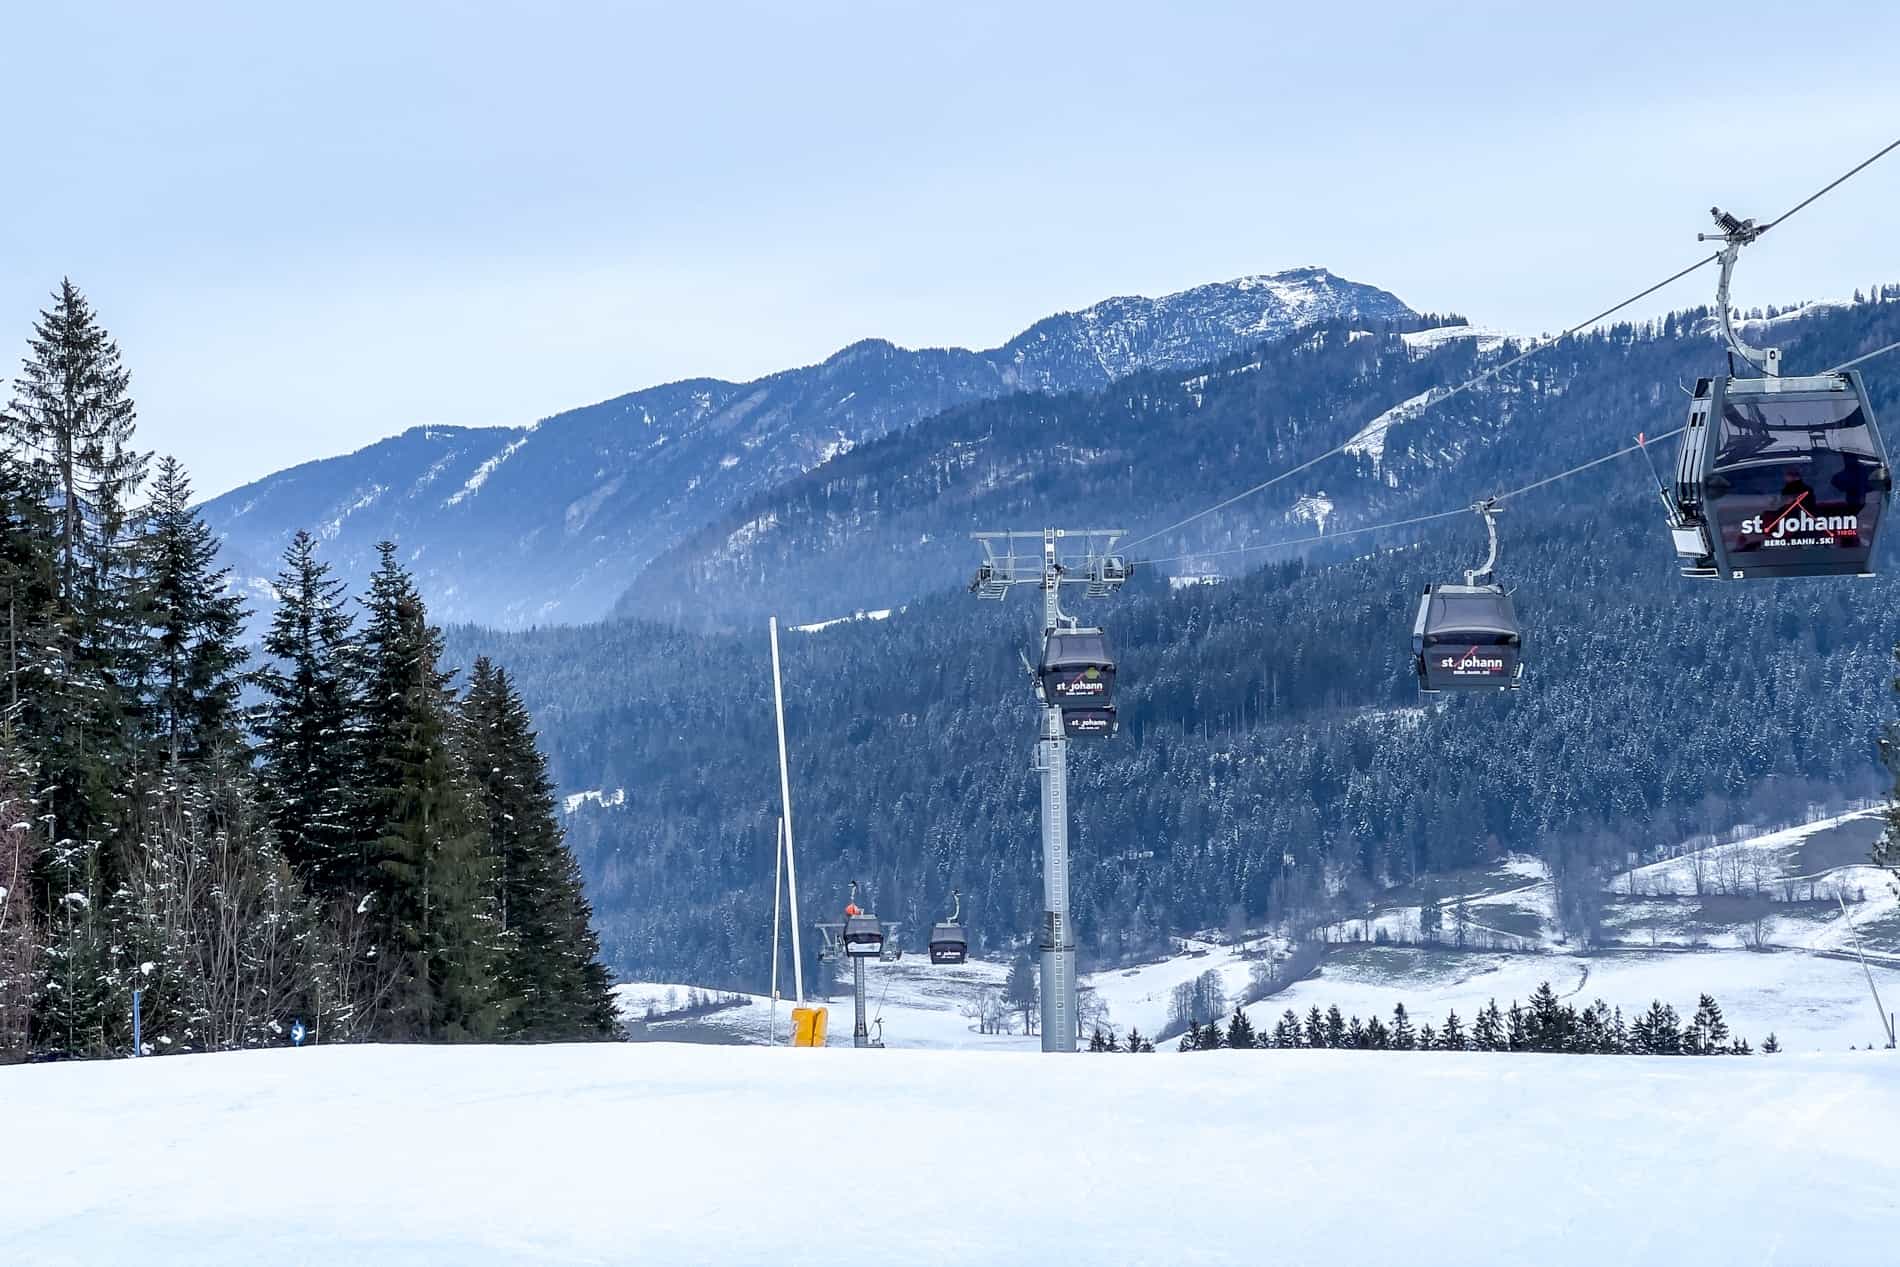 Cable cars with St. Johann in Tirol branding going up the snow-covered mountain. 